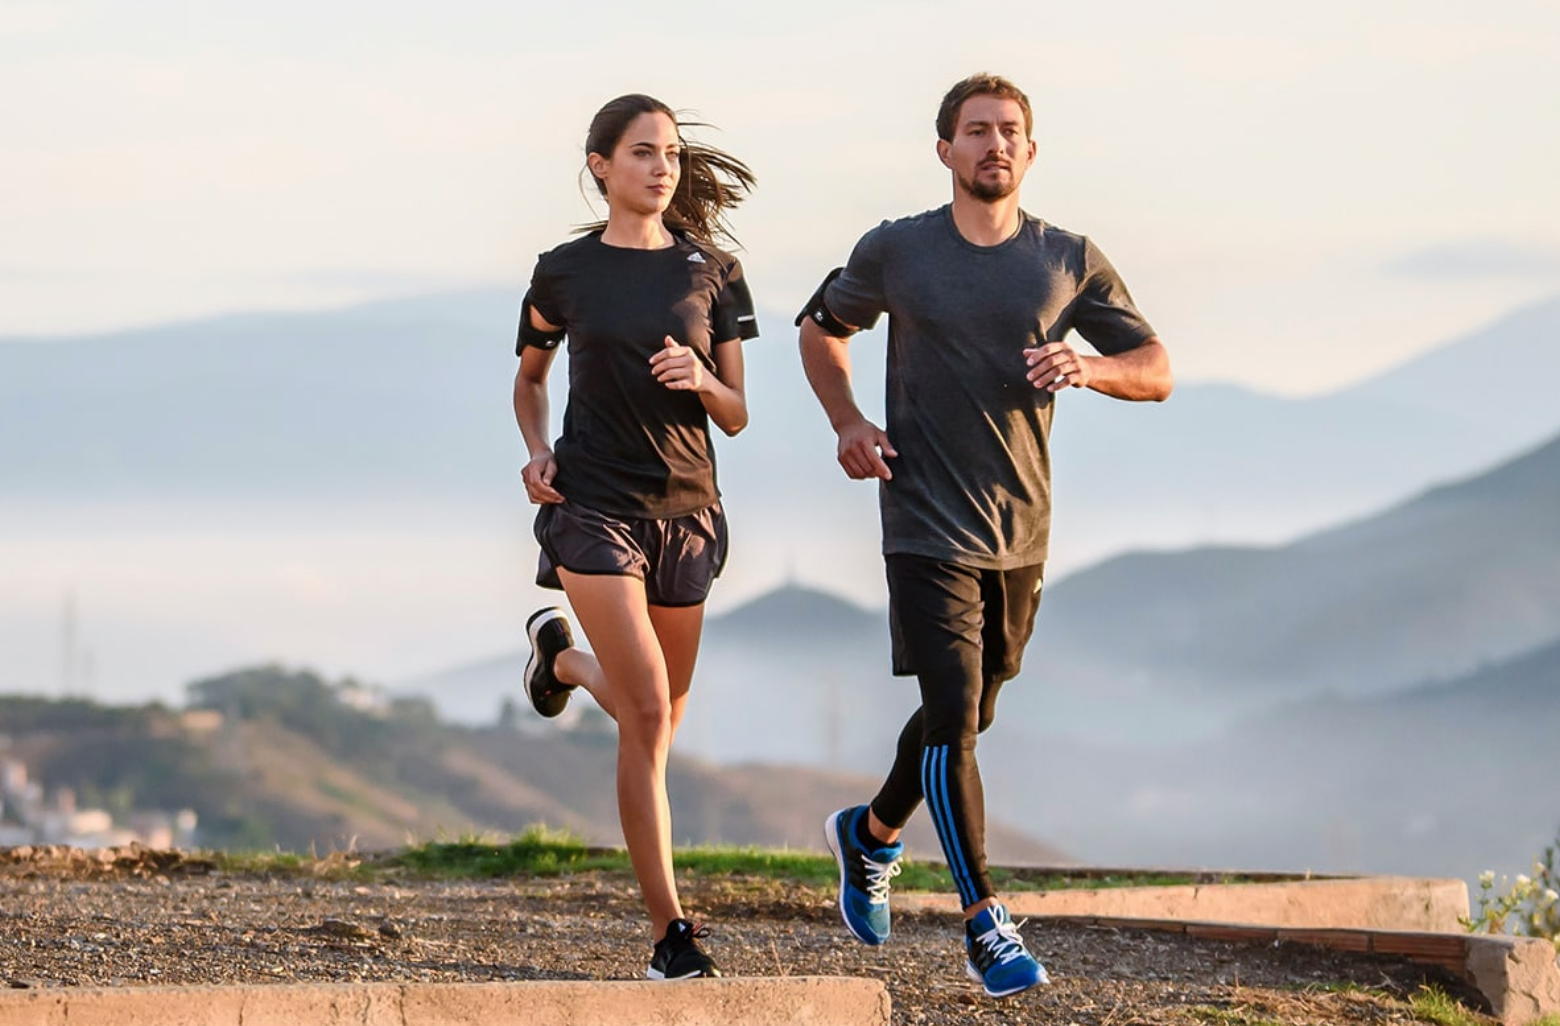 How to Start Running: Top Tips, Running Programs, and Safety